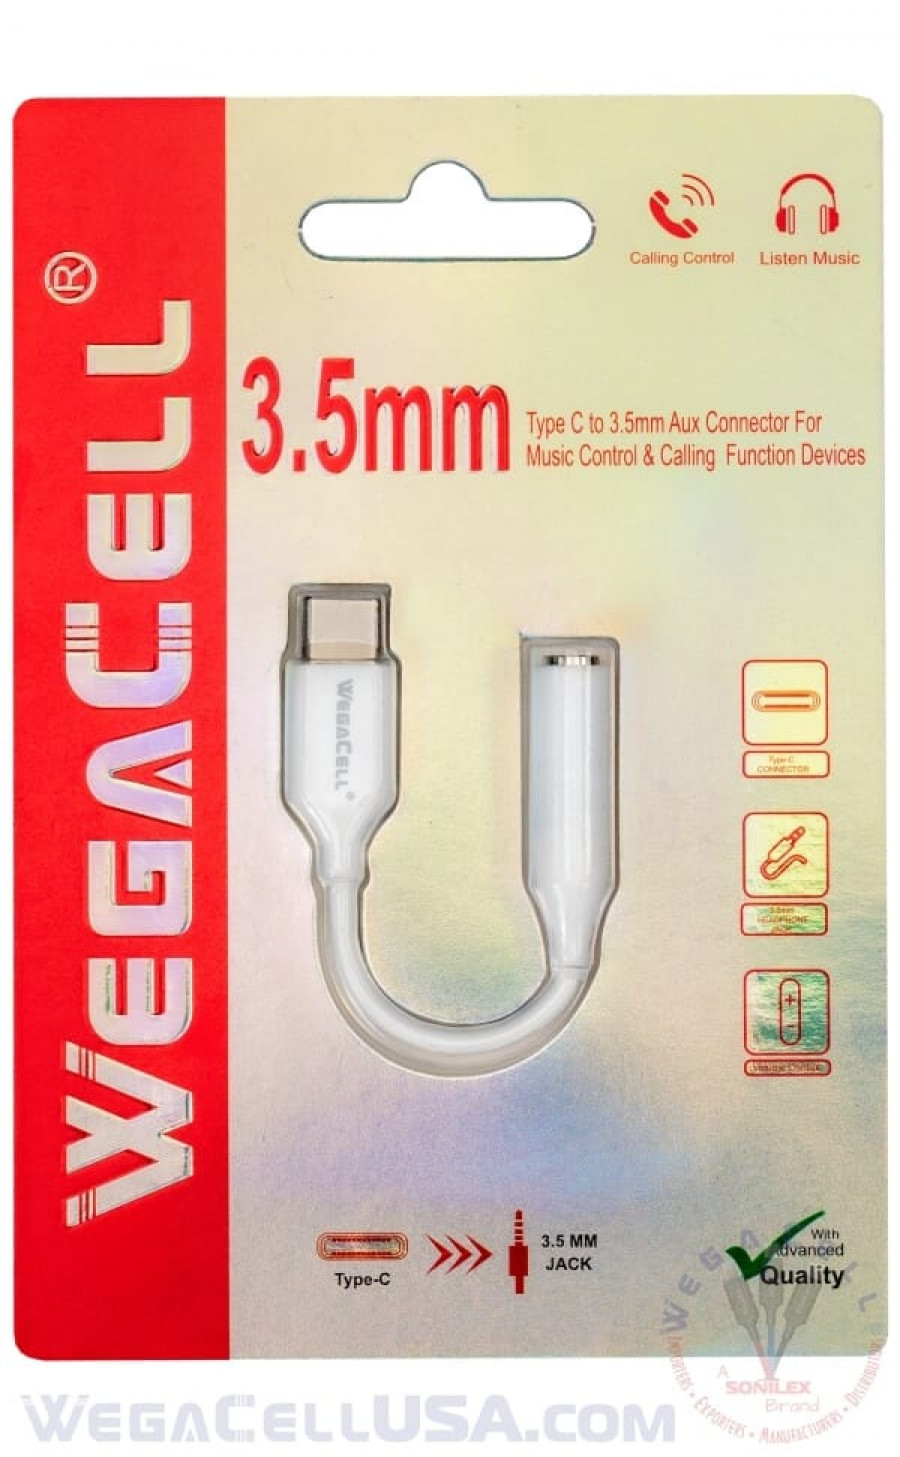 usb type c to 3.5 mm aux adapter - wholesale pkg. wegacell: wl-73tyc-cn cellphone adapter 12